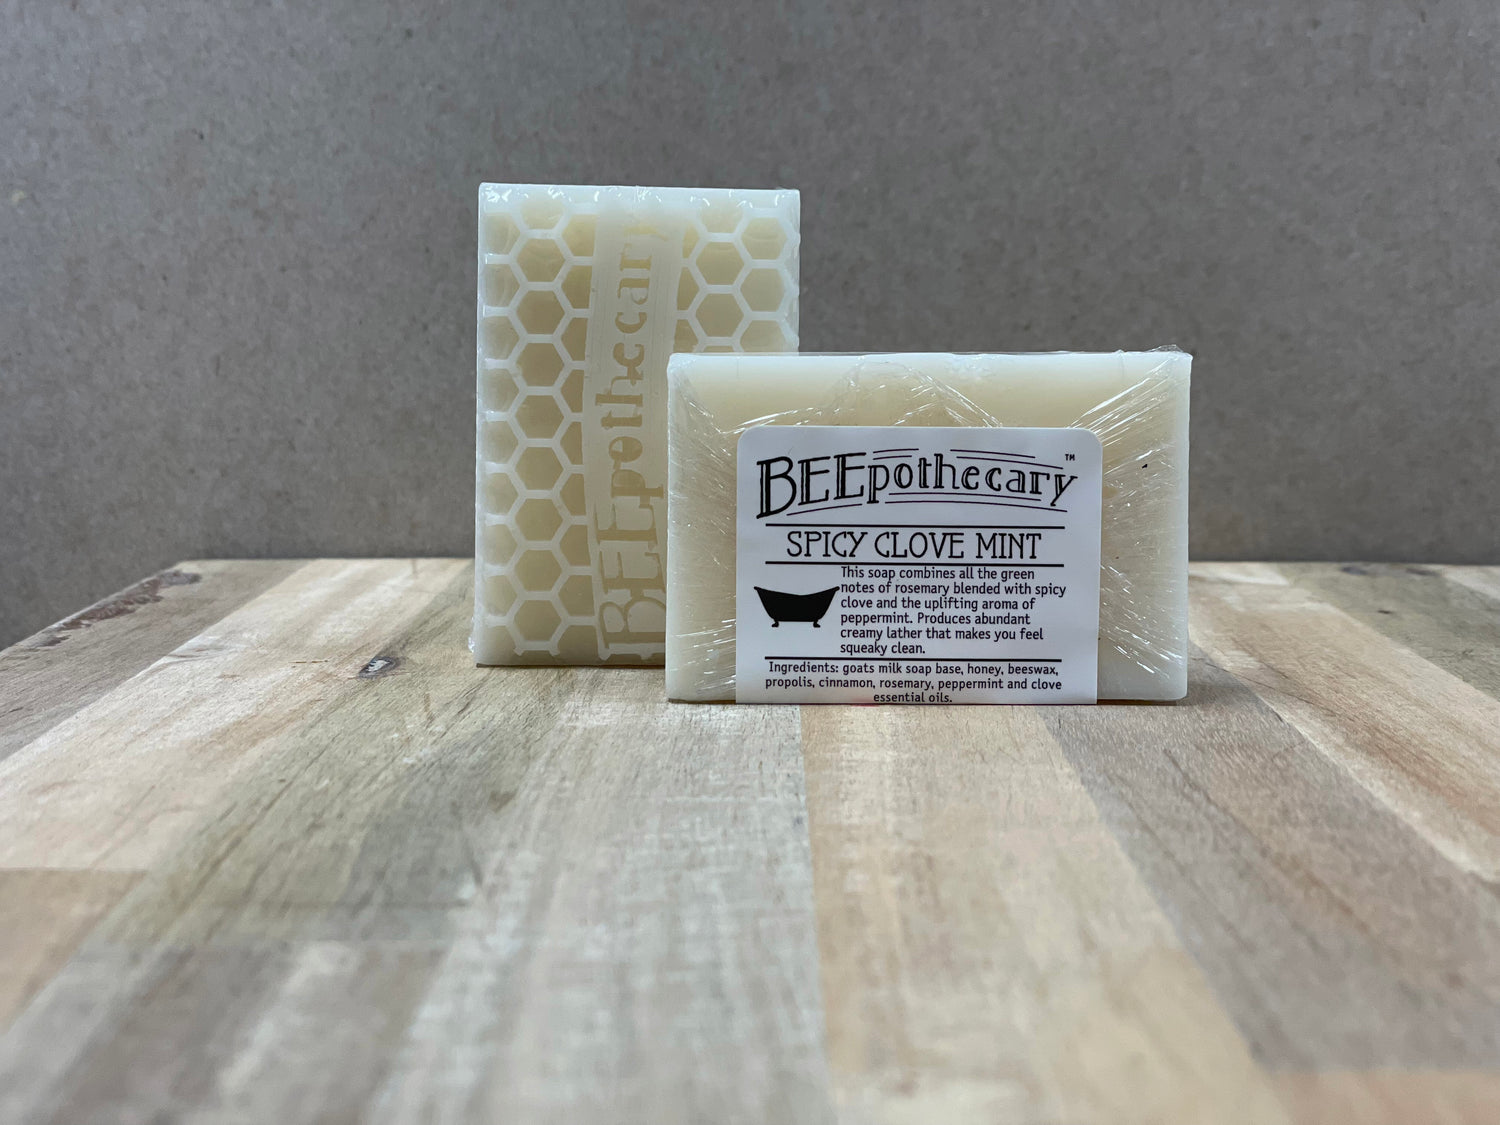 BEEpothecary Goat Milk Soap Spicy Clove Mint fragrance in packaging with white label